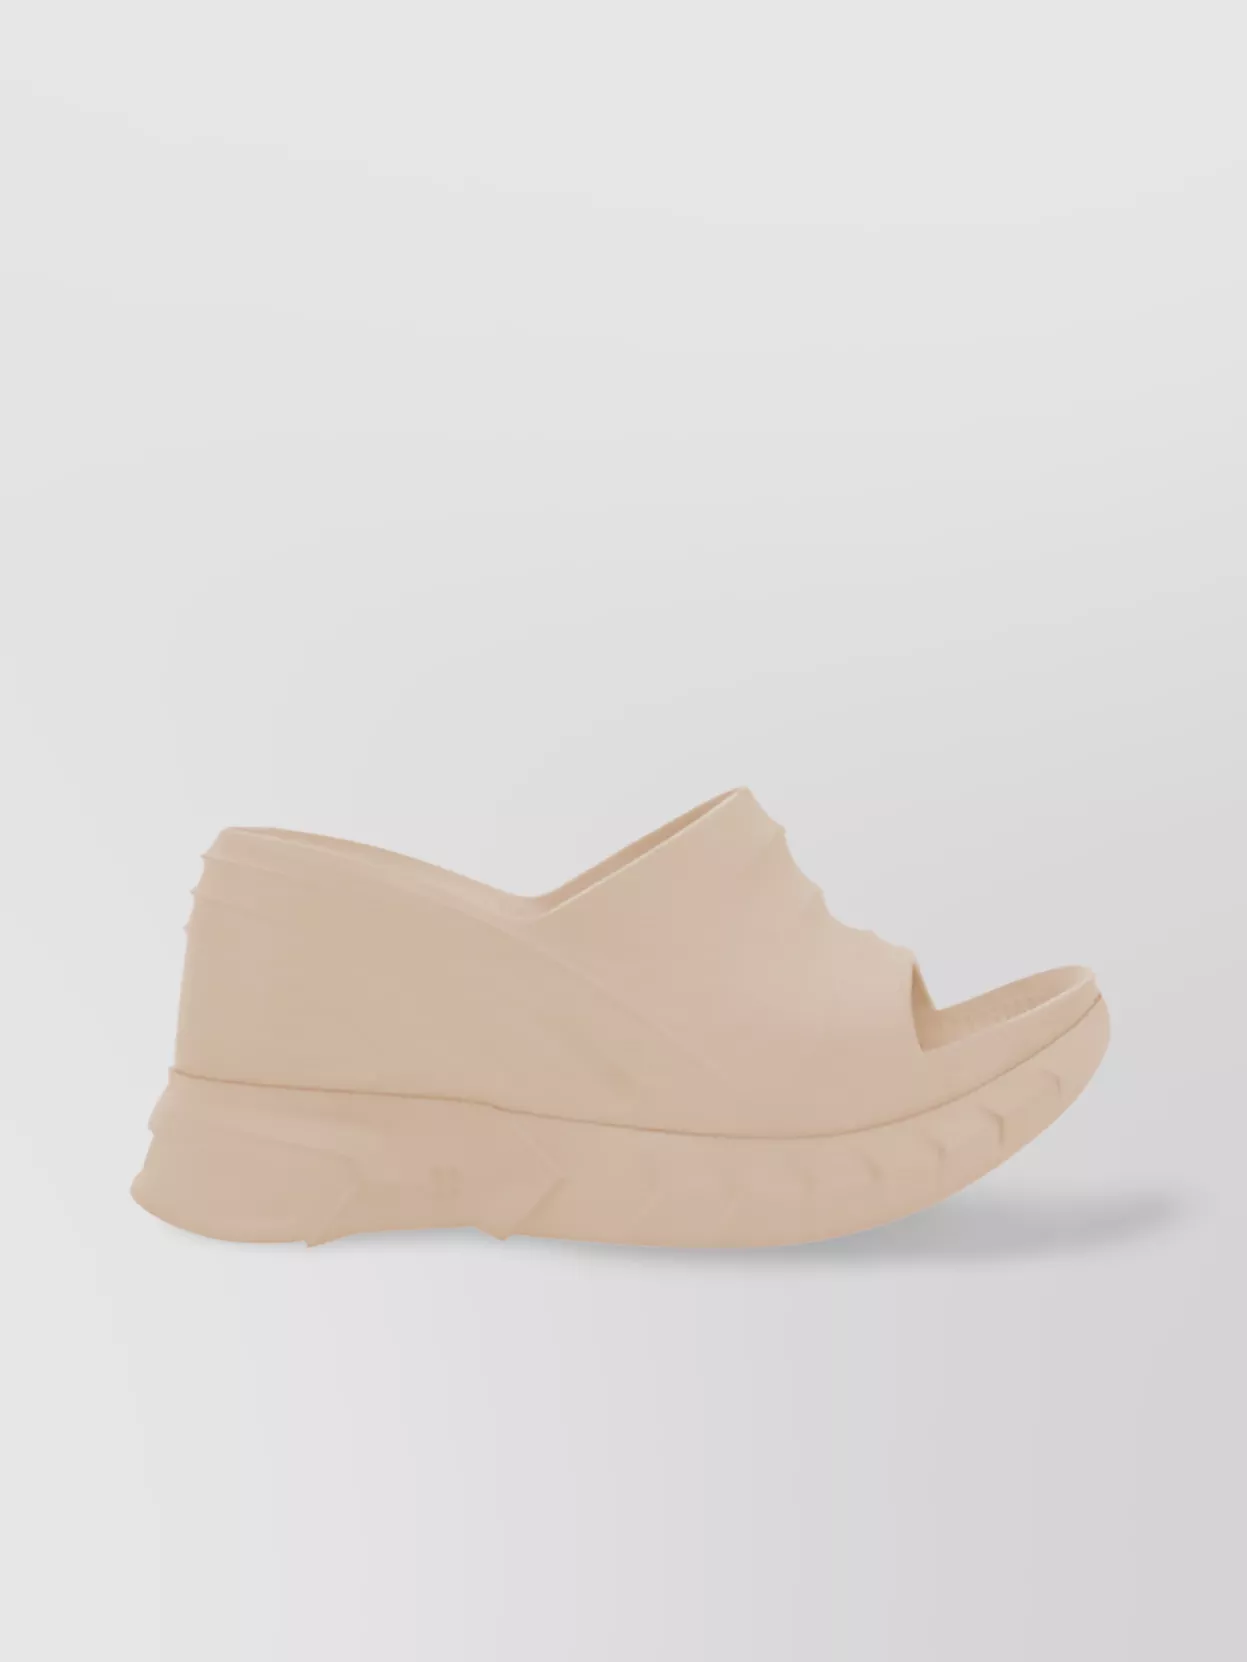 Givenchy Marshmallow Wedge Slides In Pink